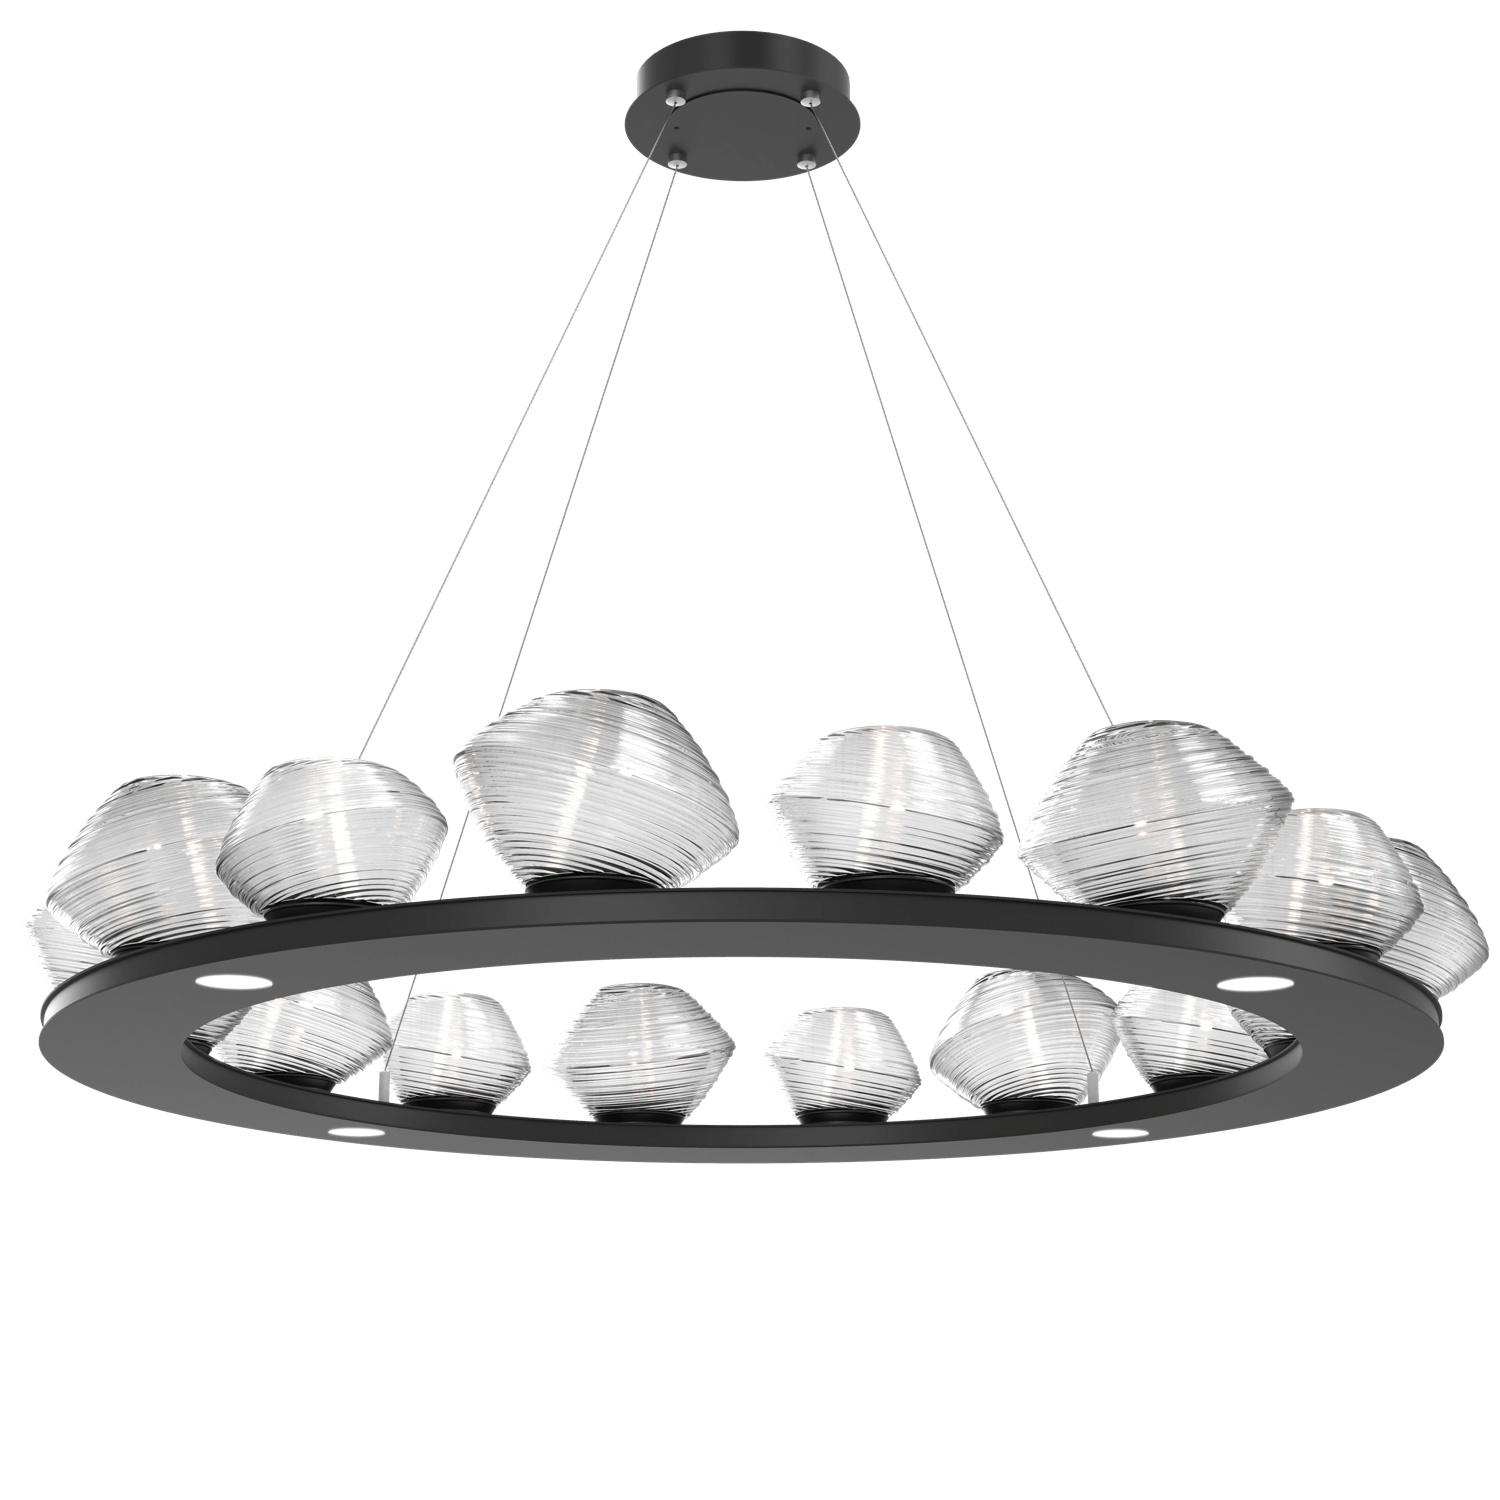 CHB0089-0D-MB-C-Hammerton-Studio-Mesa-48-inch-ring-chandelier-with-matte-black-finish-and-clear-blown-glass-shades-and-LED-lamping